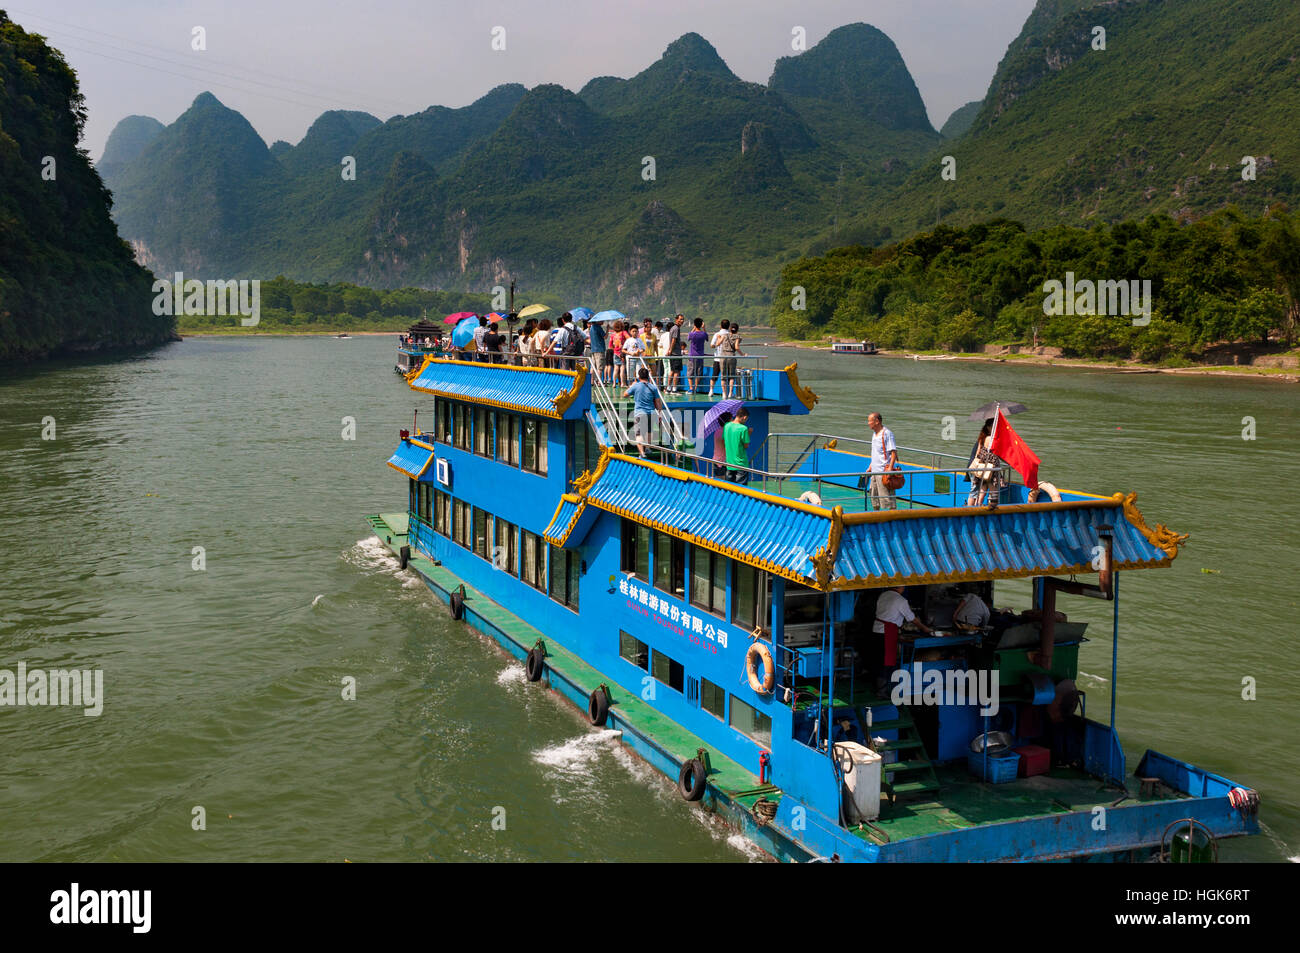 Li River, China - August 1, 2012: A passenger boat making the trip between Guilin in Yangshuo in the Li River, in China Stock Photo